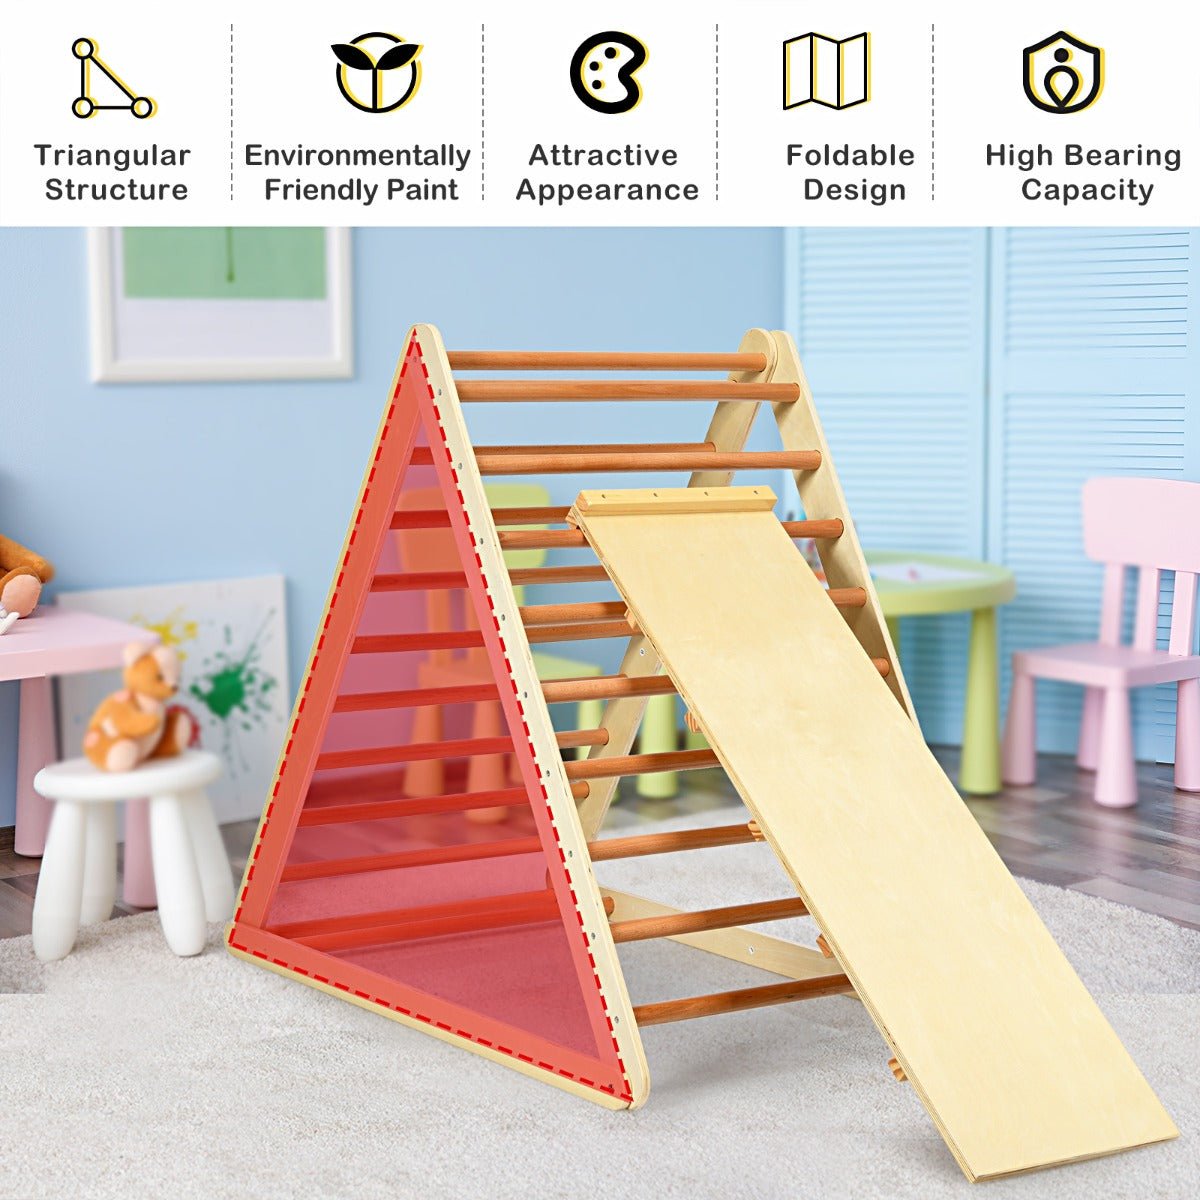 Wooden Triangle Ladder with Safety Structure - Natural Play for Kids